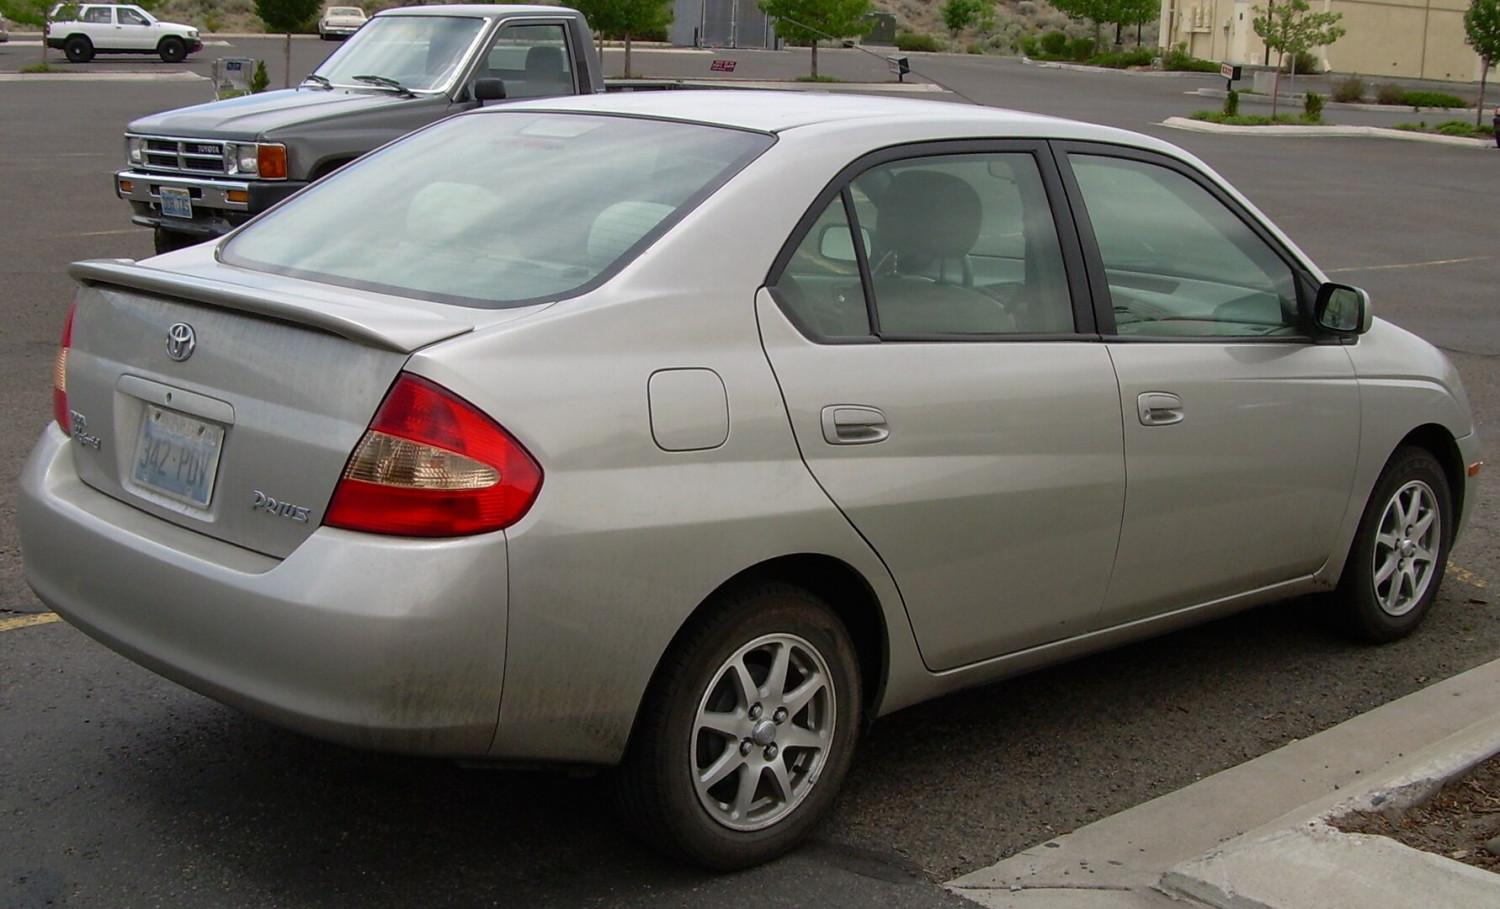 Example of a Prius 1 NHW11